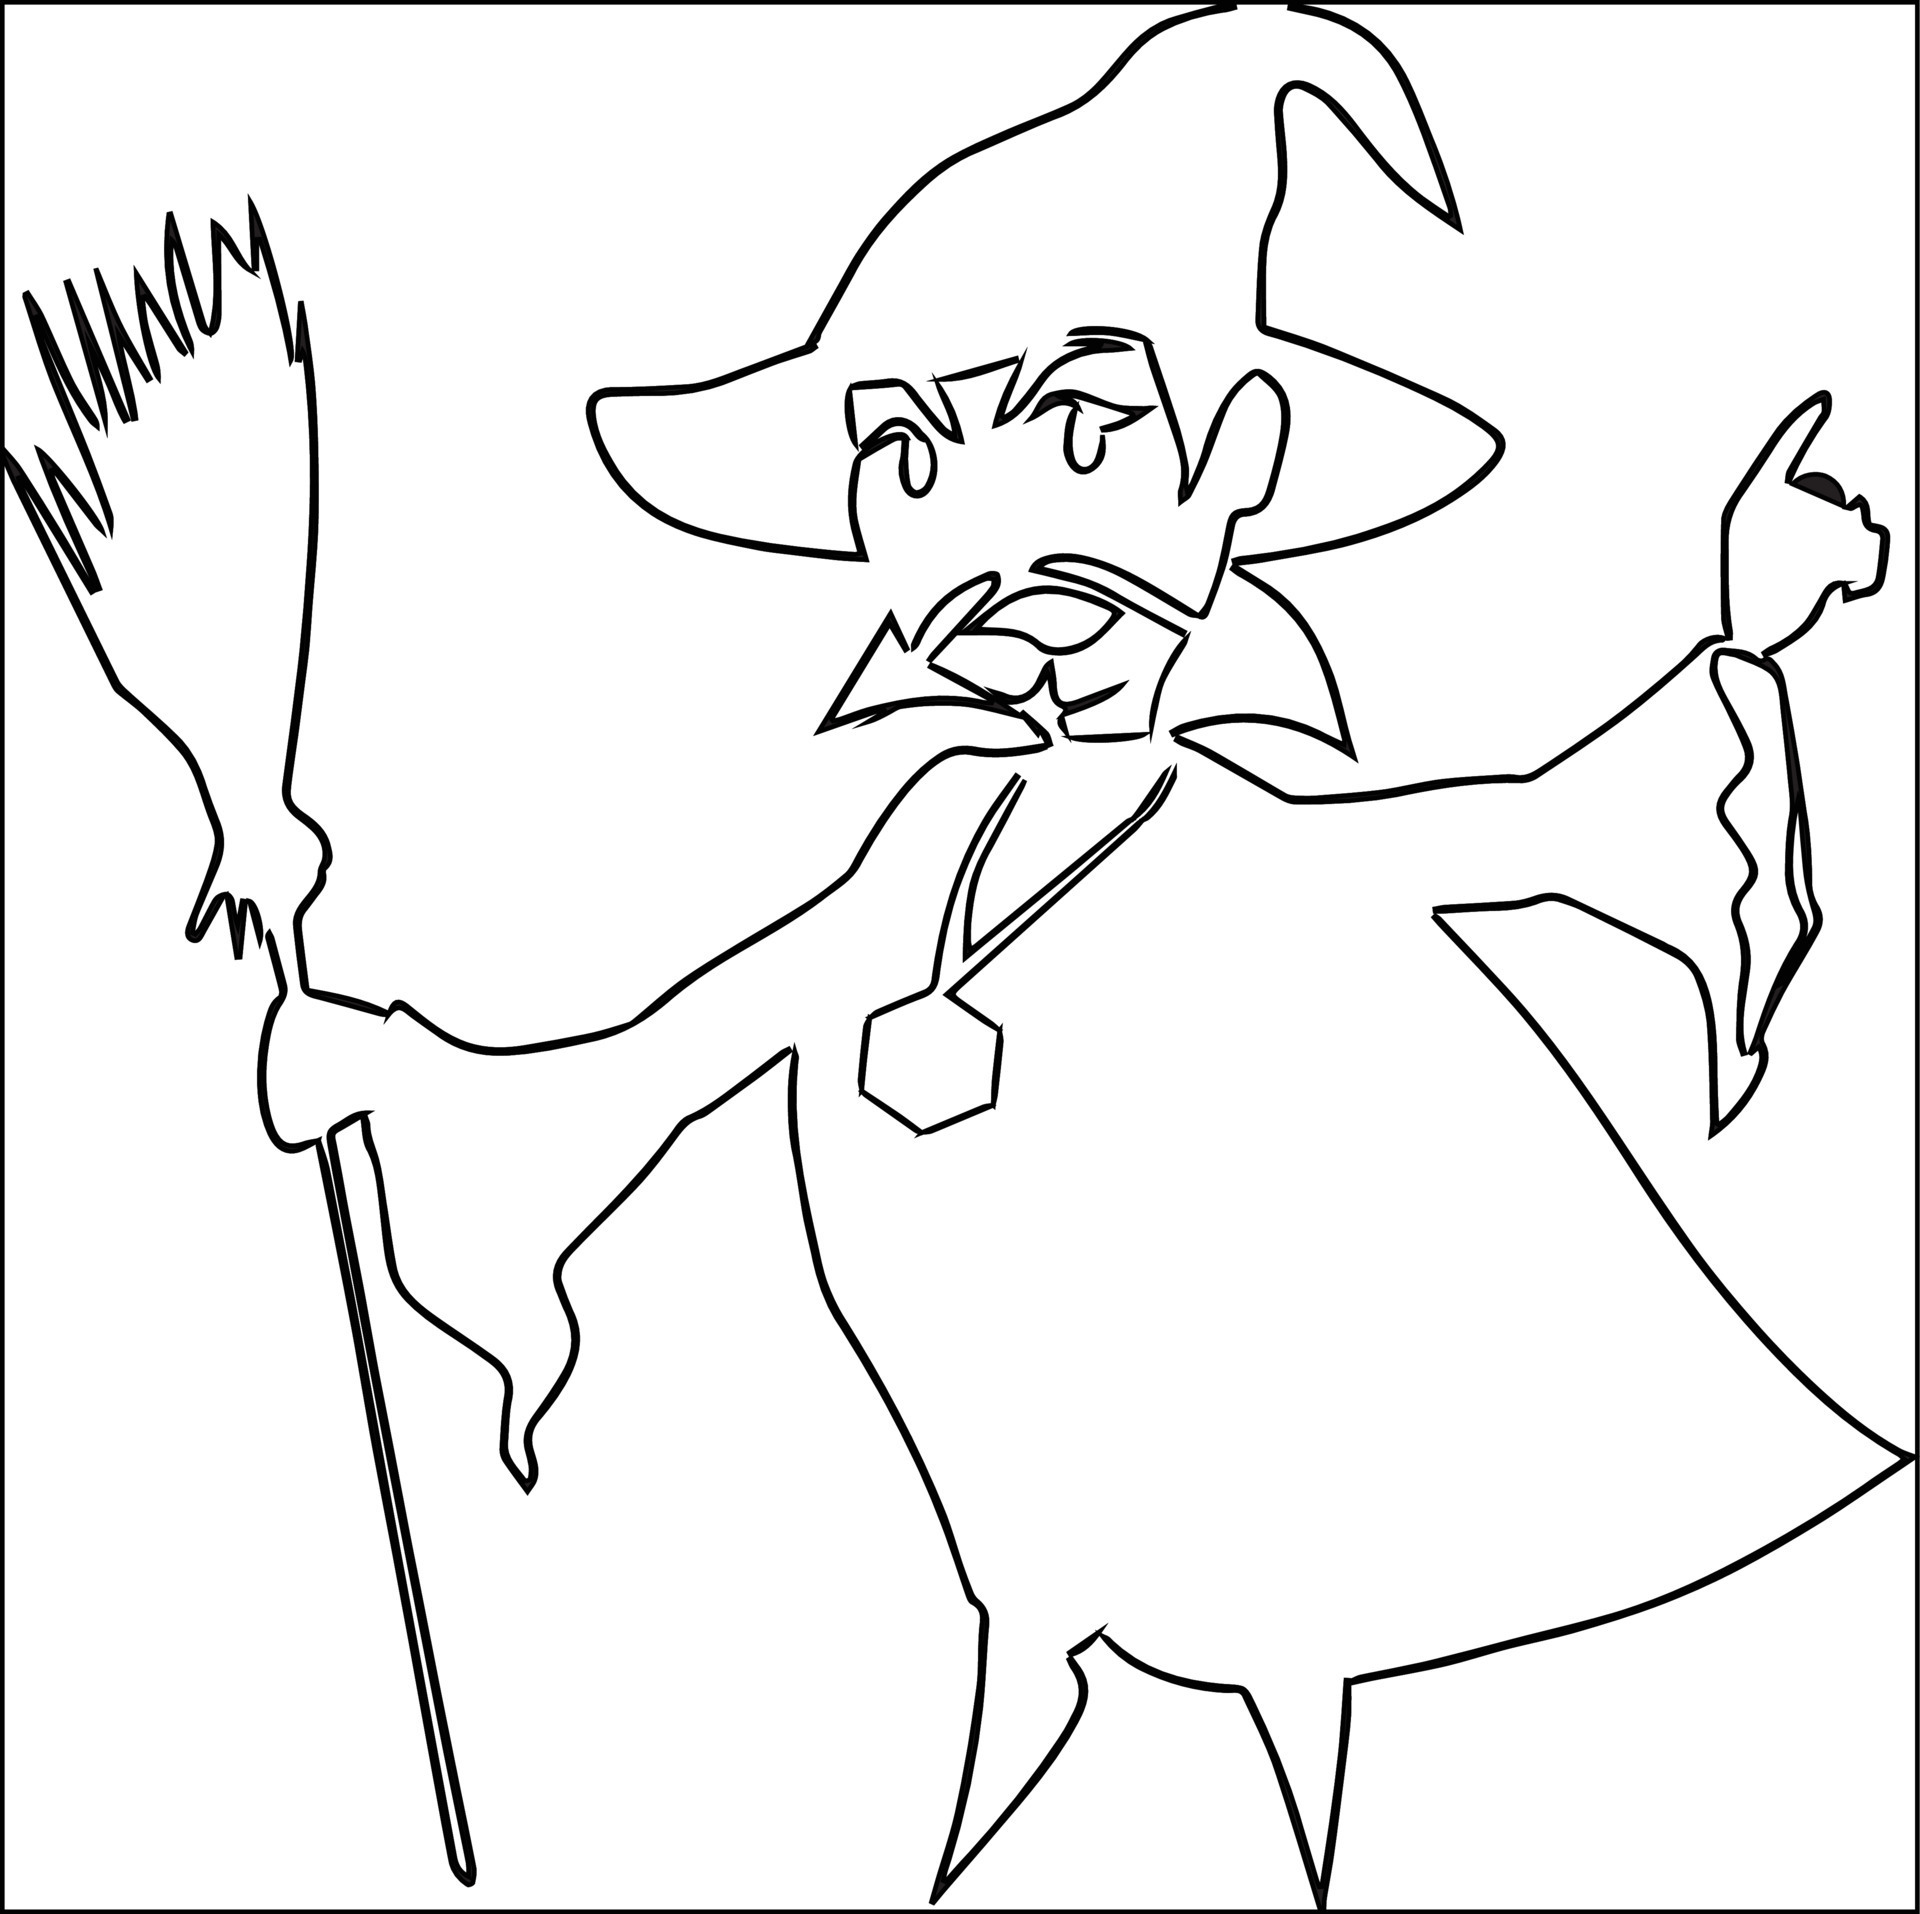 Halloween Line Art And Illustrationsd for coloring Pages 13058557 ...